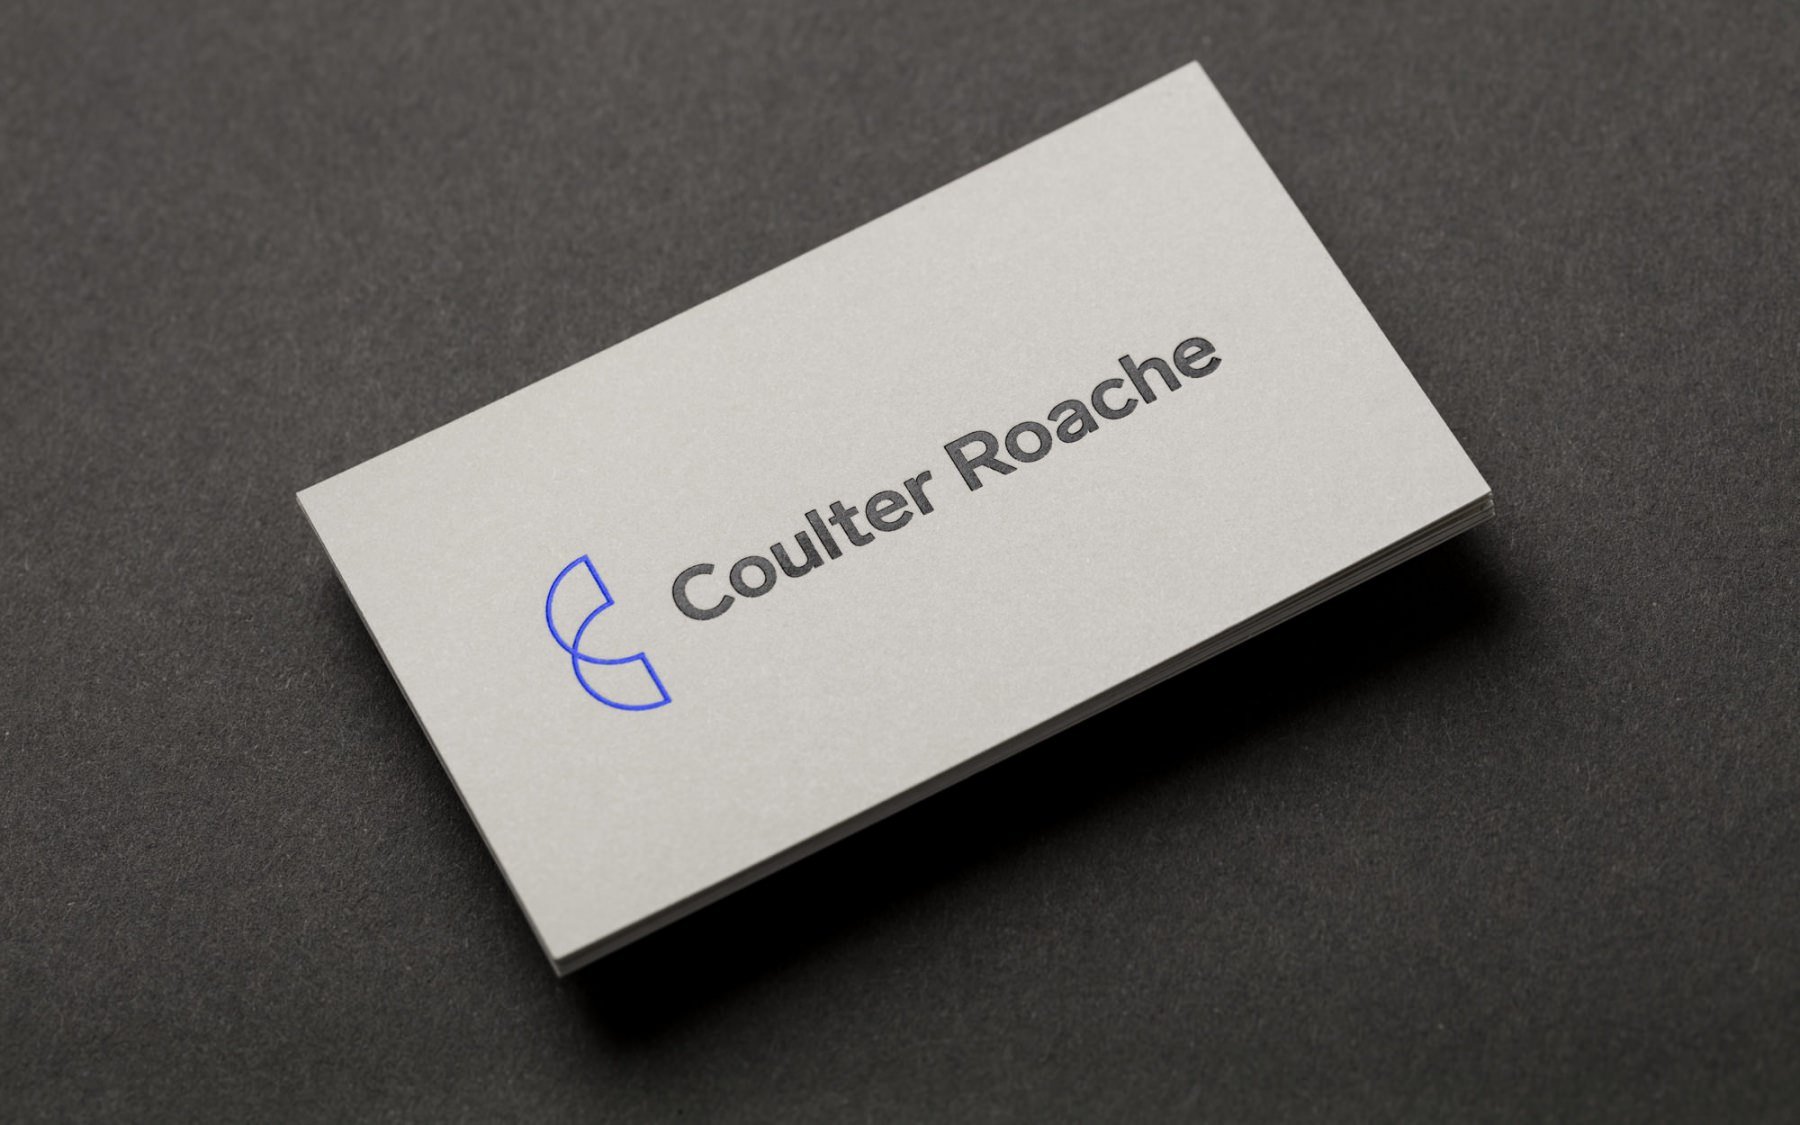 Coulter Roache business card stack